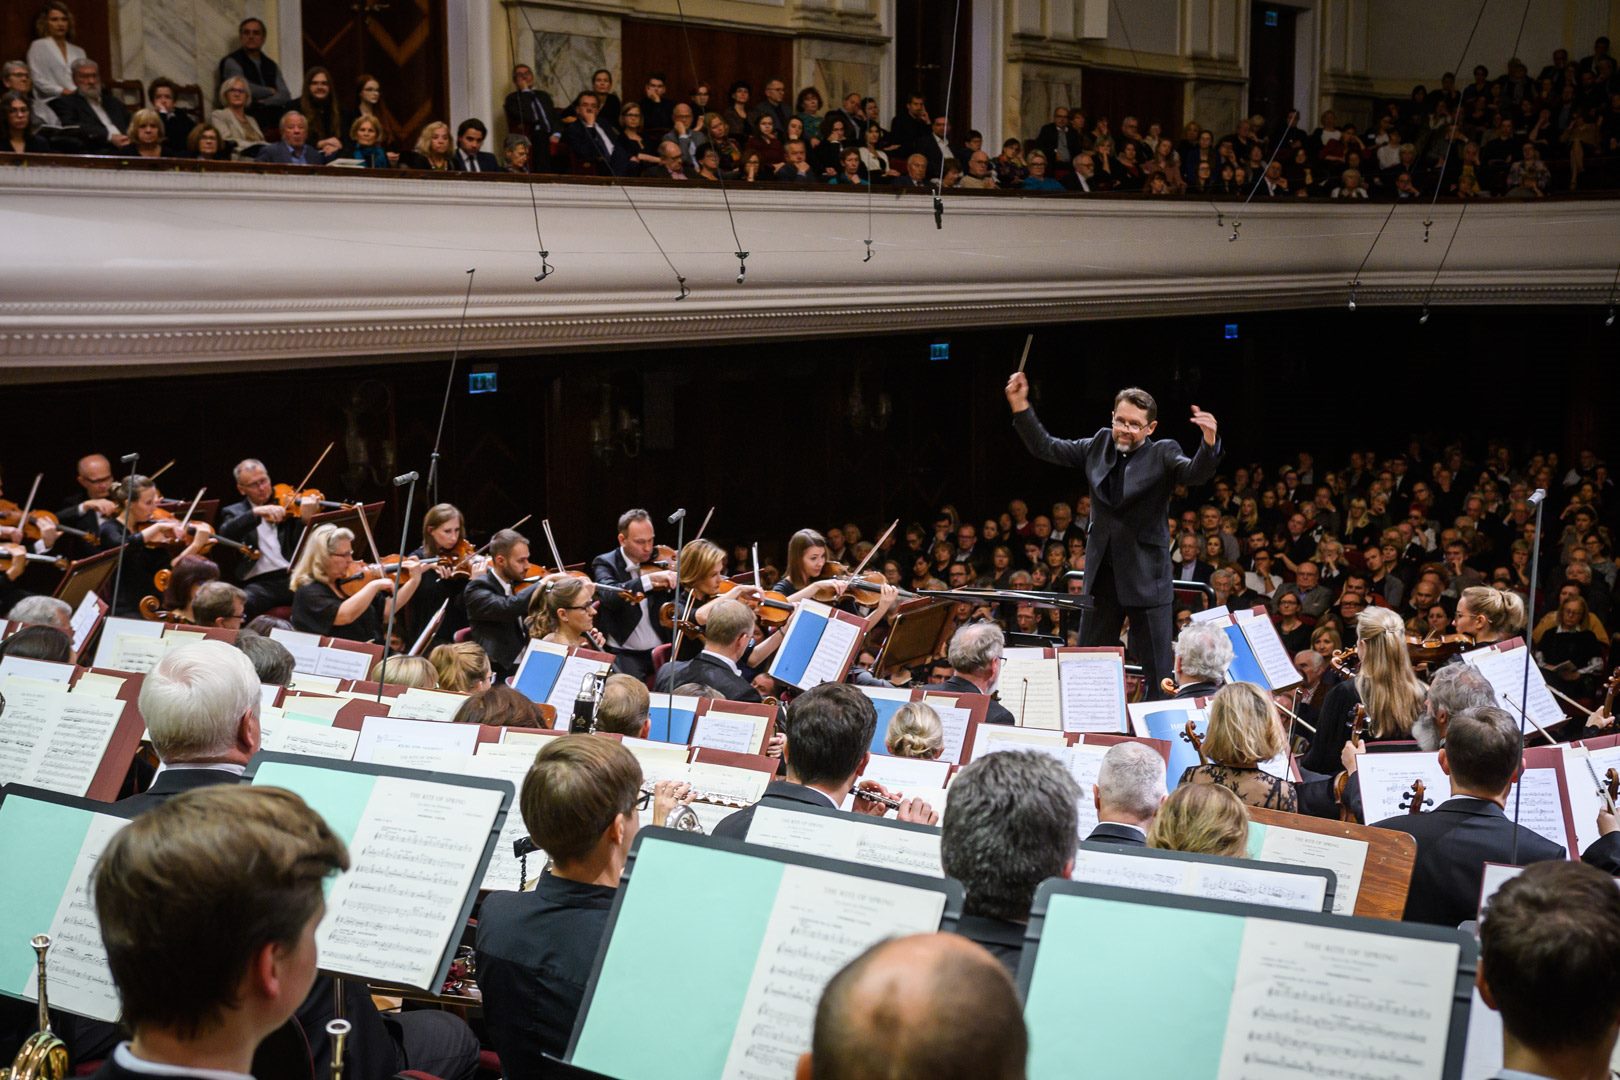 20-captivating-facts-about-warsaw-philharmonic-hall